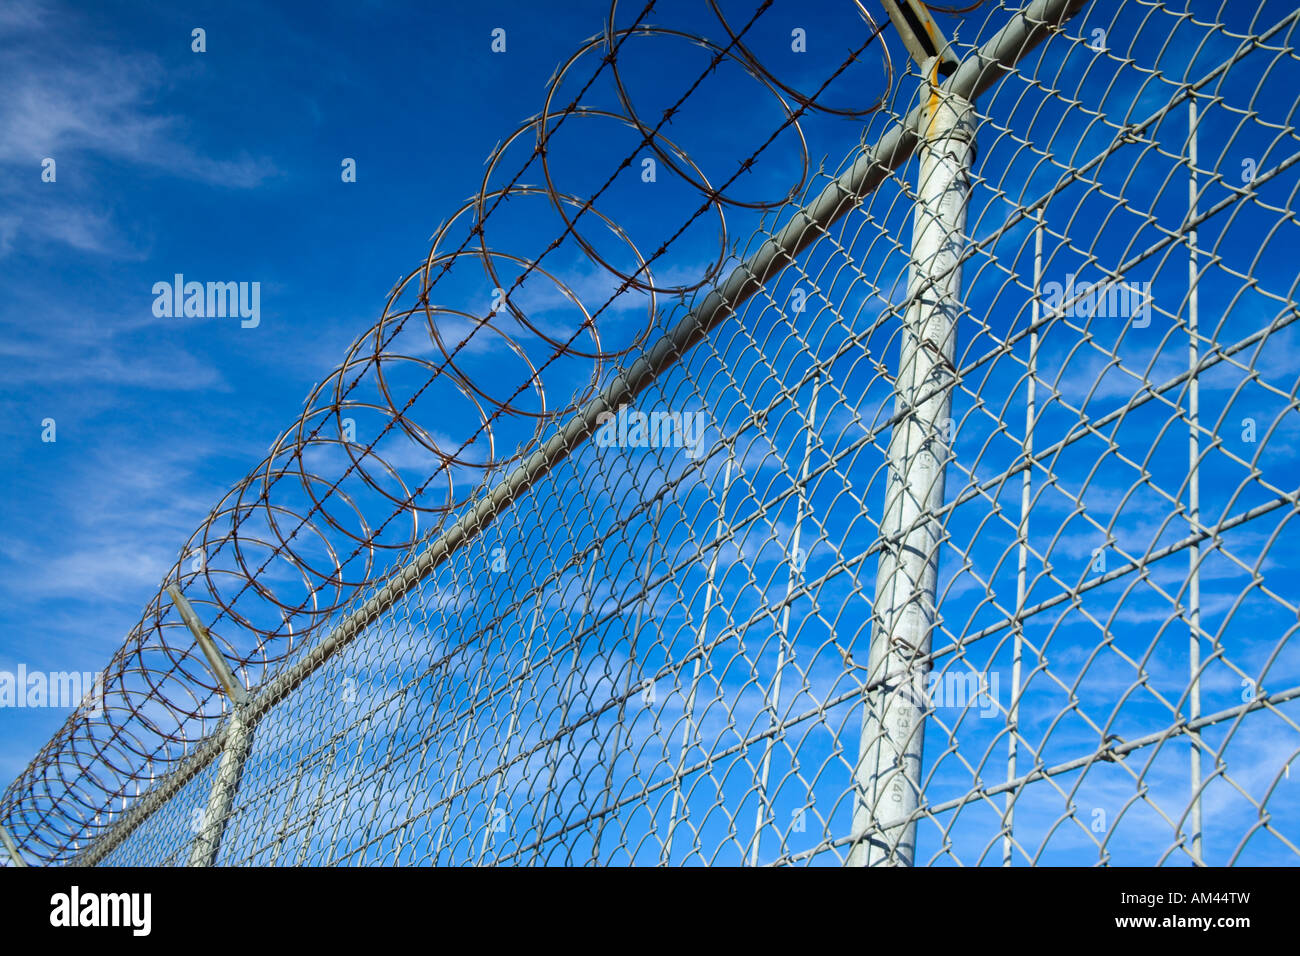 Chain link security fence with barbed razor wire. Stock Photo